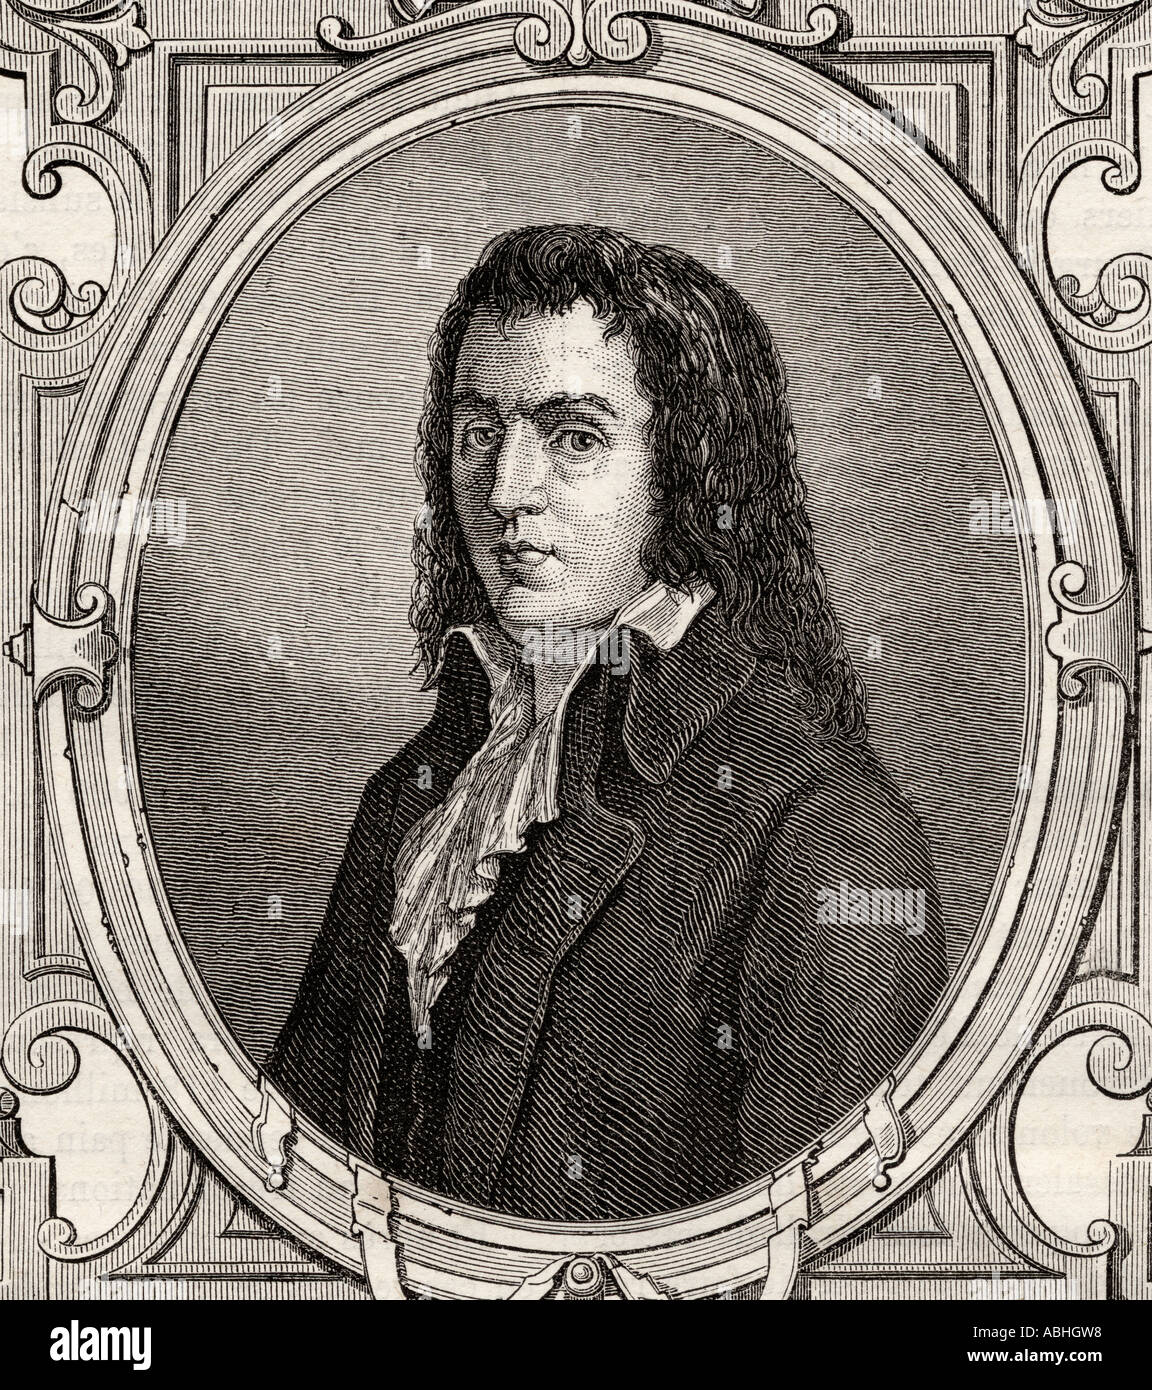 François-Noël Babeuf, 1760 – 1797, aka Gracchus or Gracus. French political agitator and journalist during the French Revolution. Stock Photo